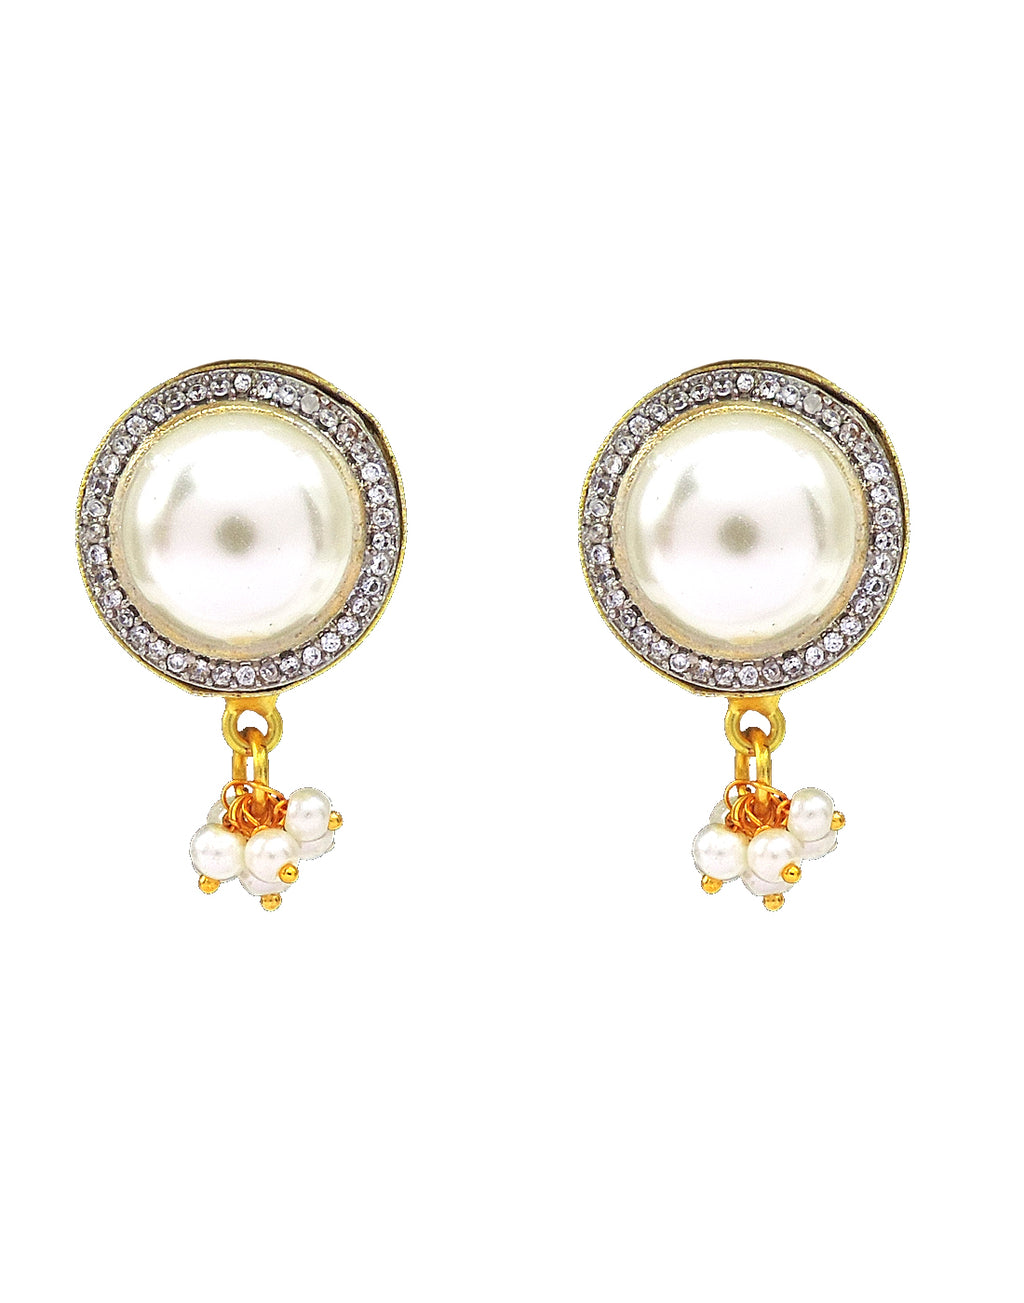 Round Crystal & Pearl Earrings - Statement Earrings - Gold-Plated & Hypoallergenic Jewellery - Made in India - Dubai Jewellery - Dori